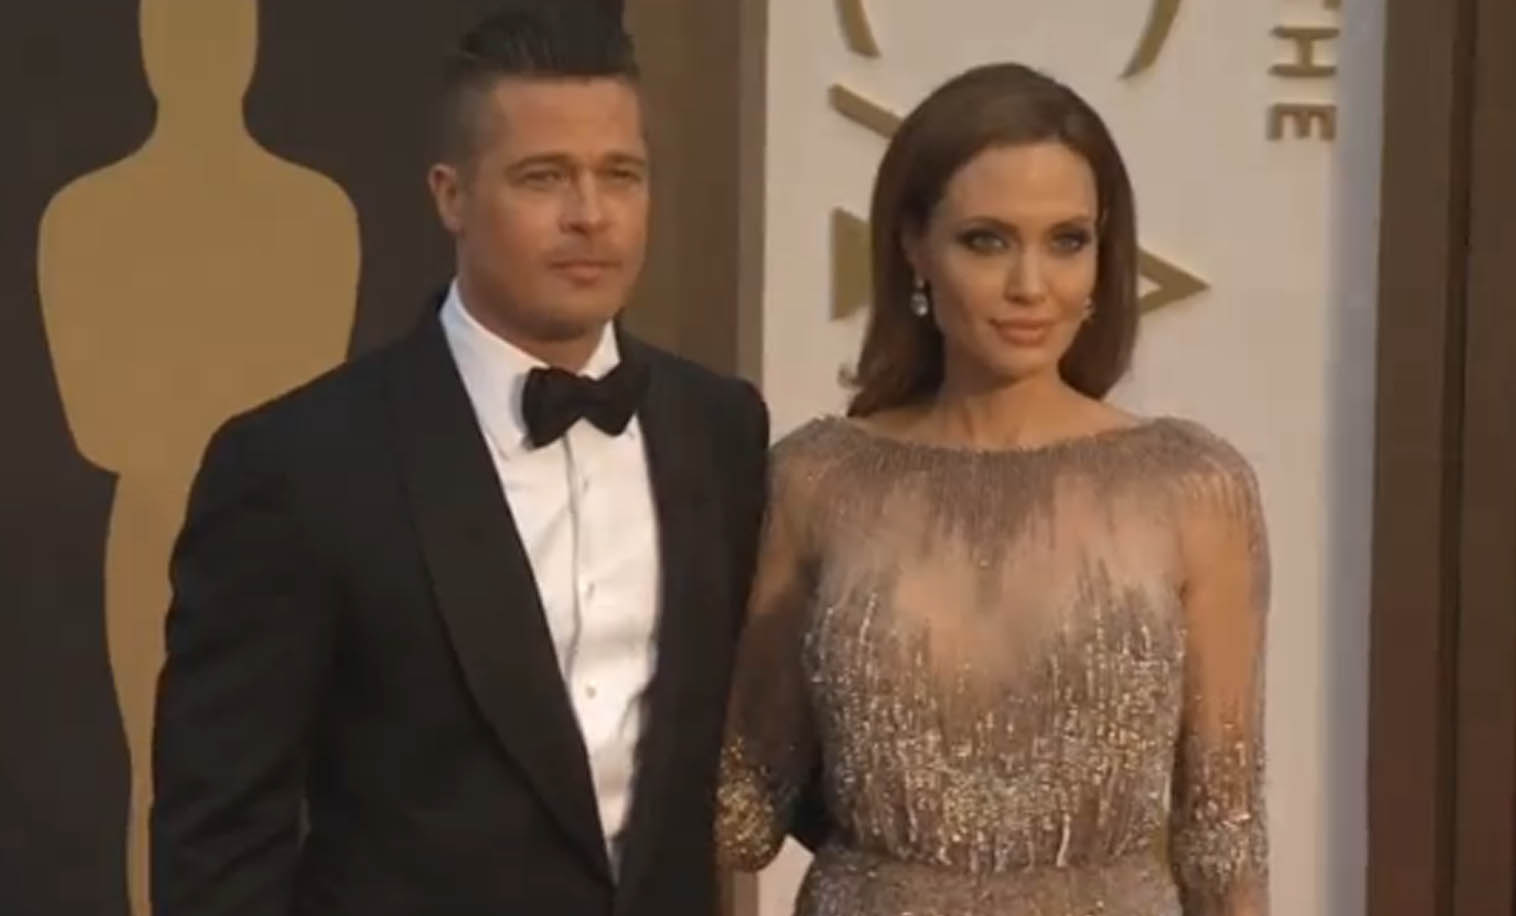 A Los Angeles judge denies Brad Pitt request to keep documents private in his divorce case with Angelina Jolie. (Photo courtesy to Reuters video.)